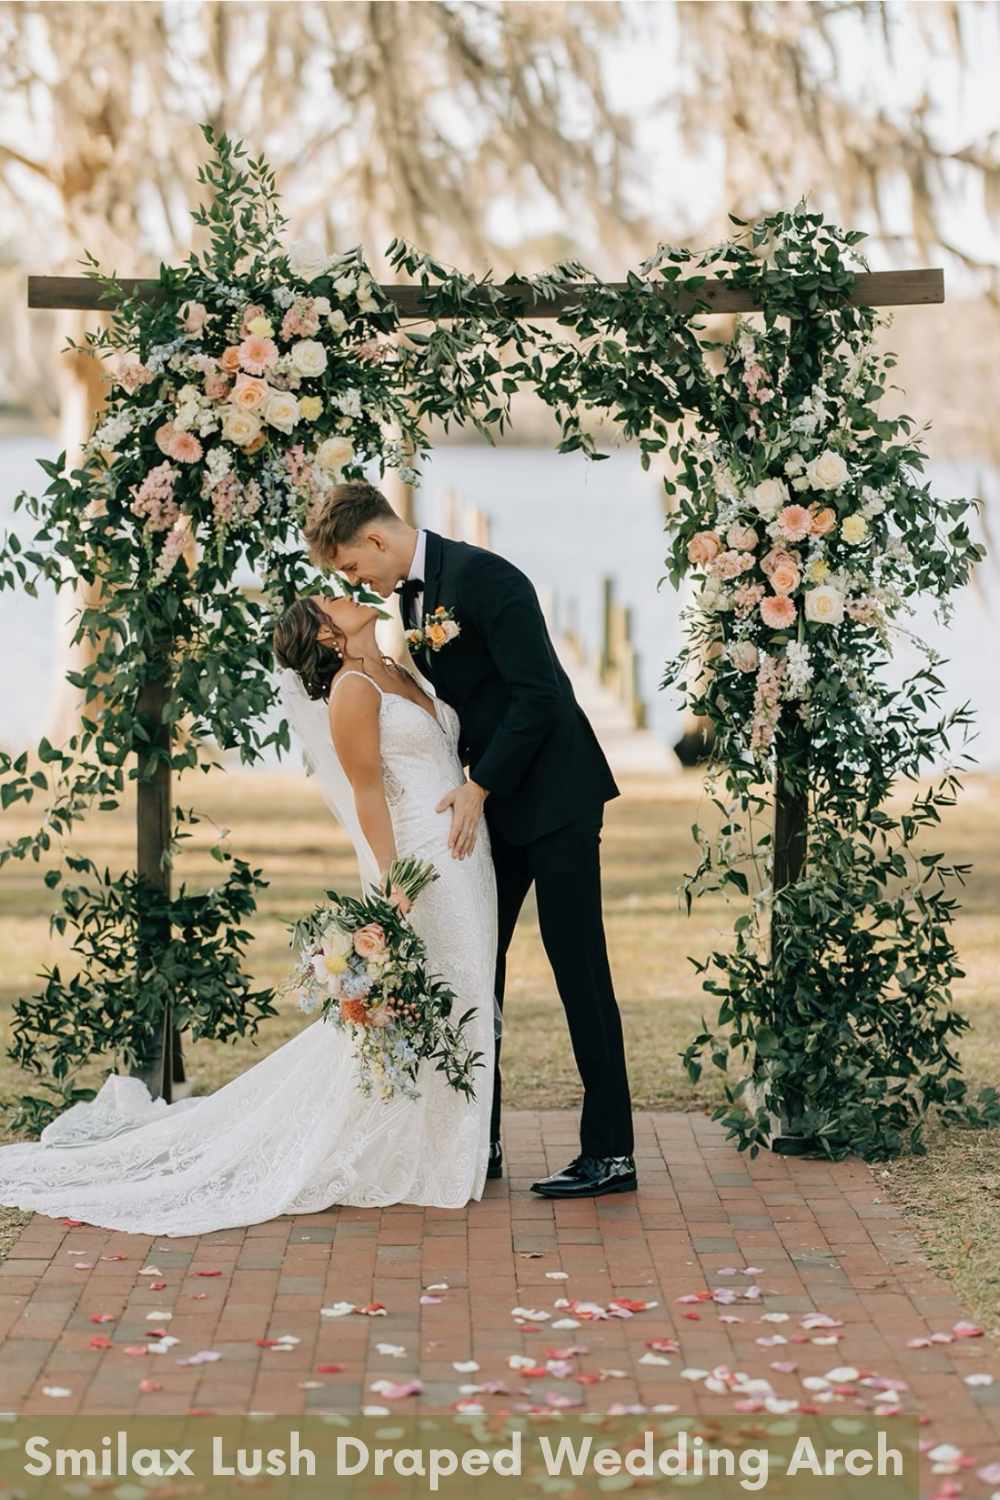 7 Creative Ways to Incorporate Smilax in Your Wedding Decor